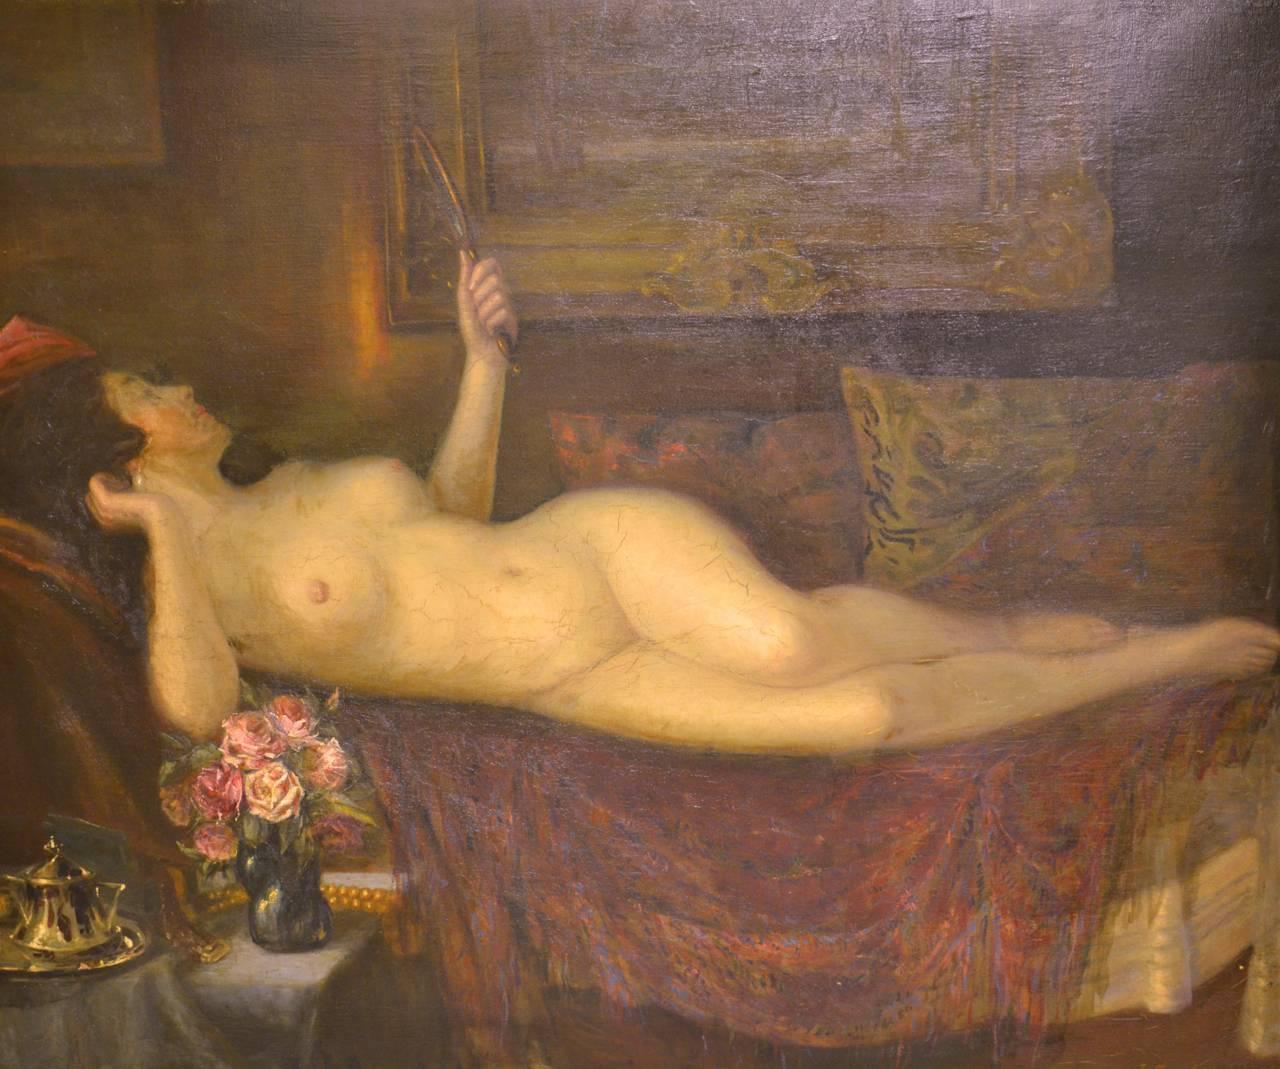 Reclining Nude Woman w Mirror & Roses LARGE Oil Painting 19th cent POLISH ARTIST